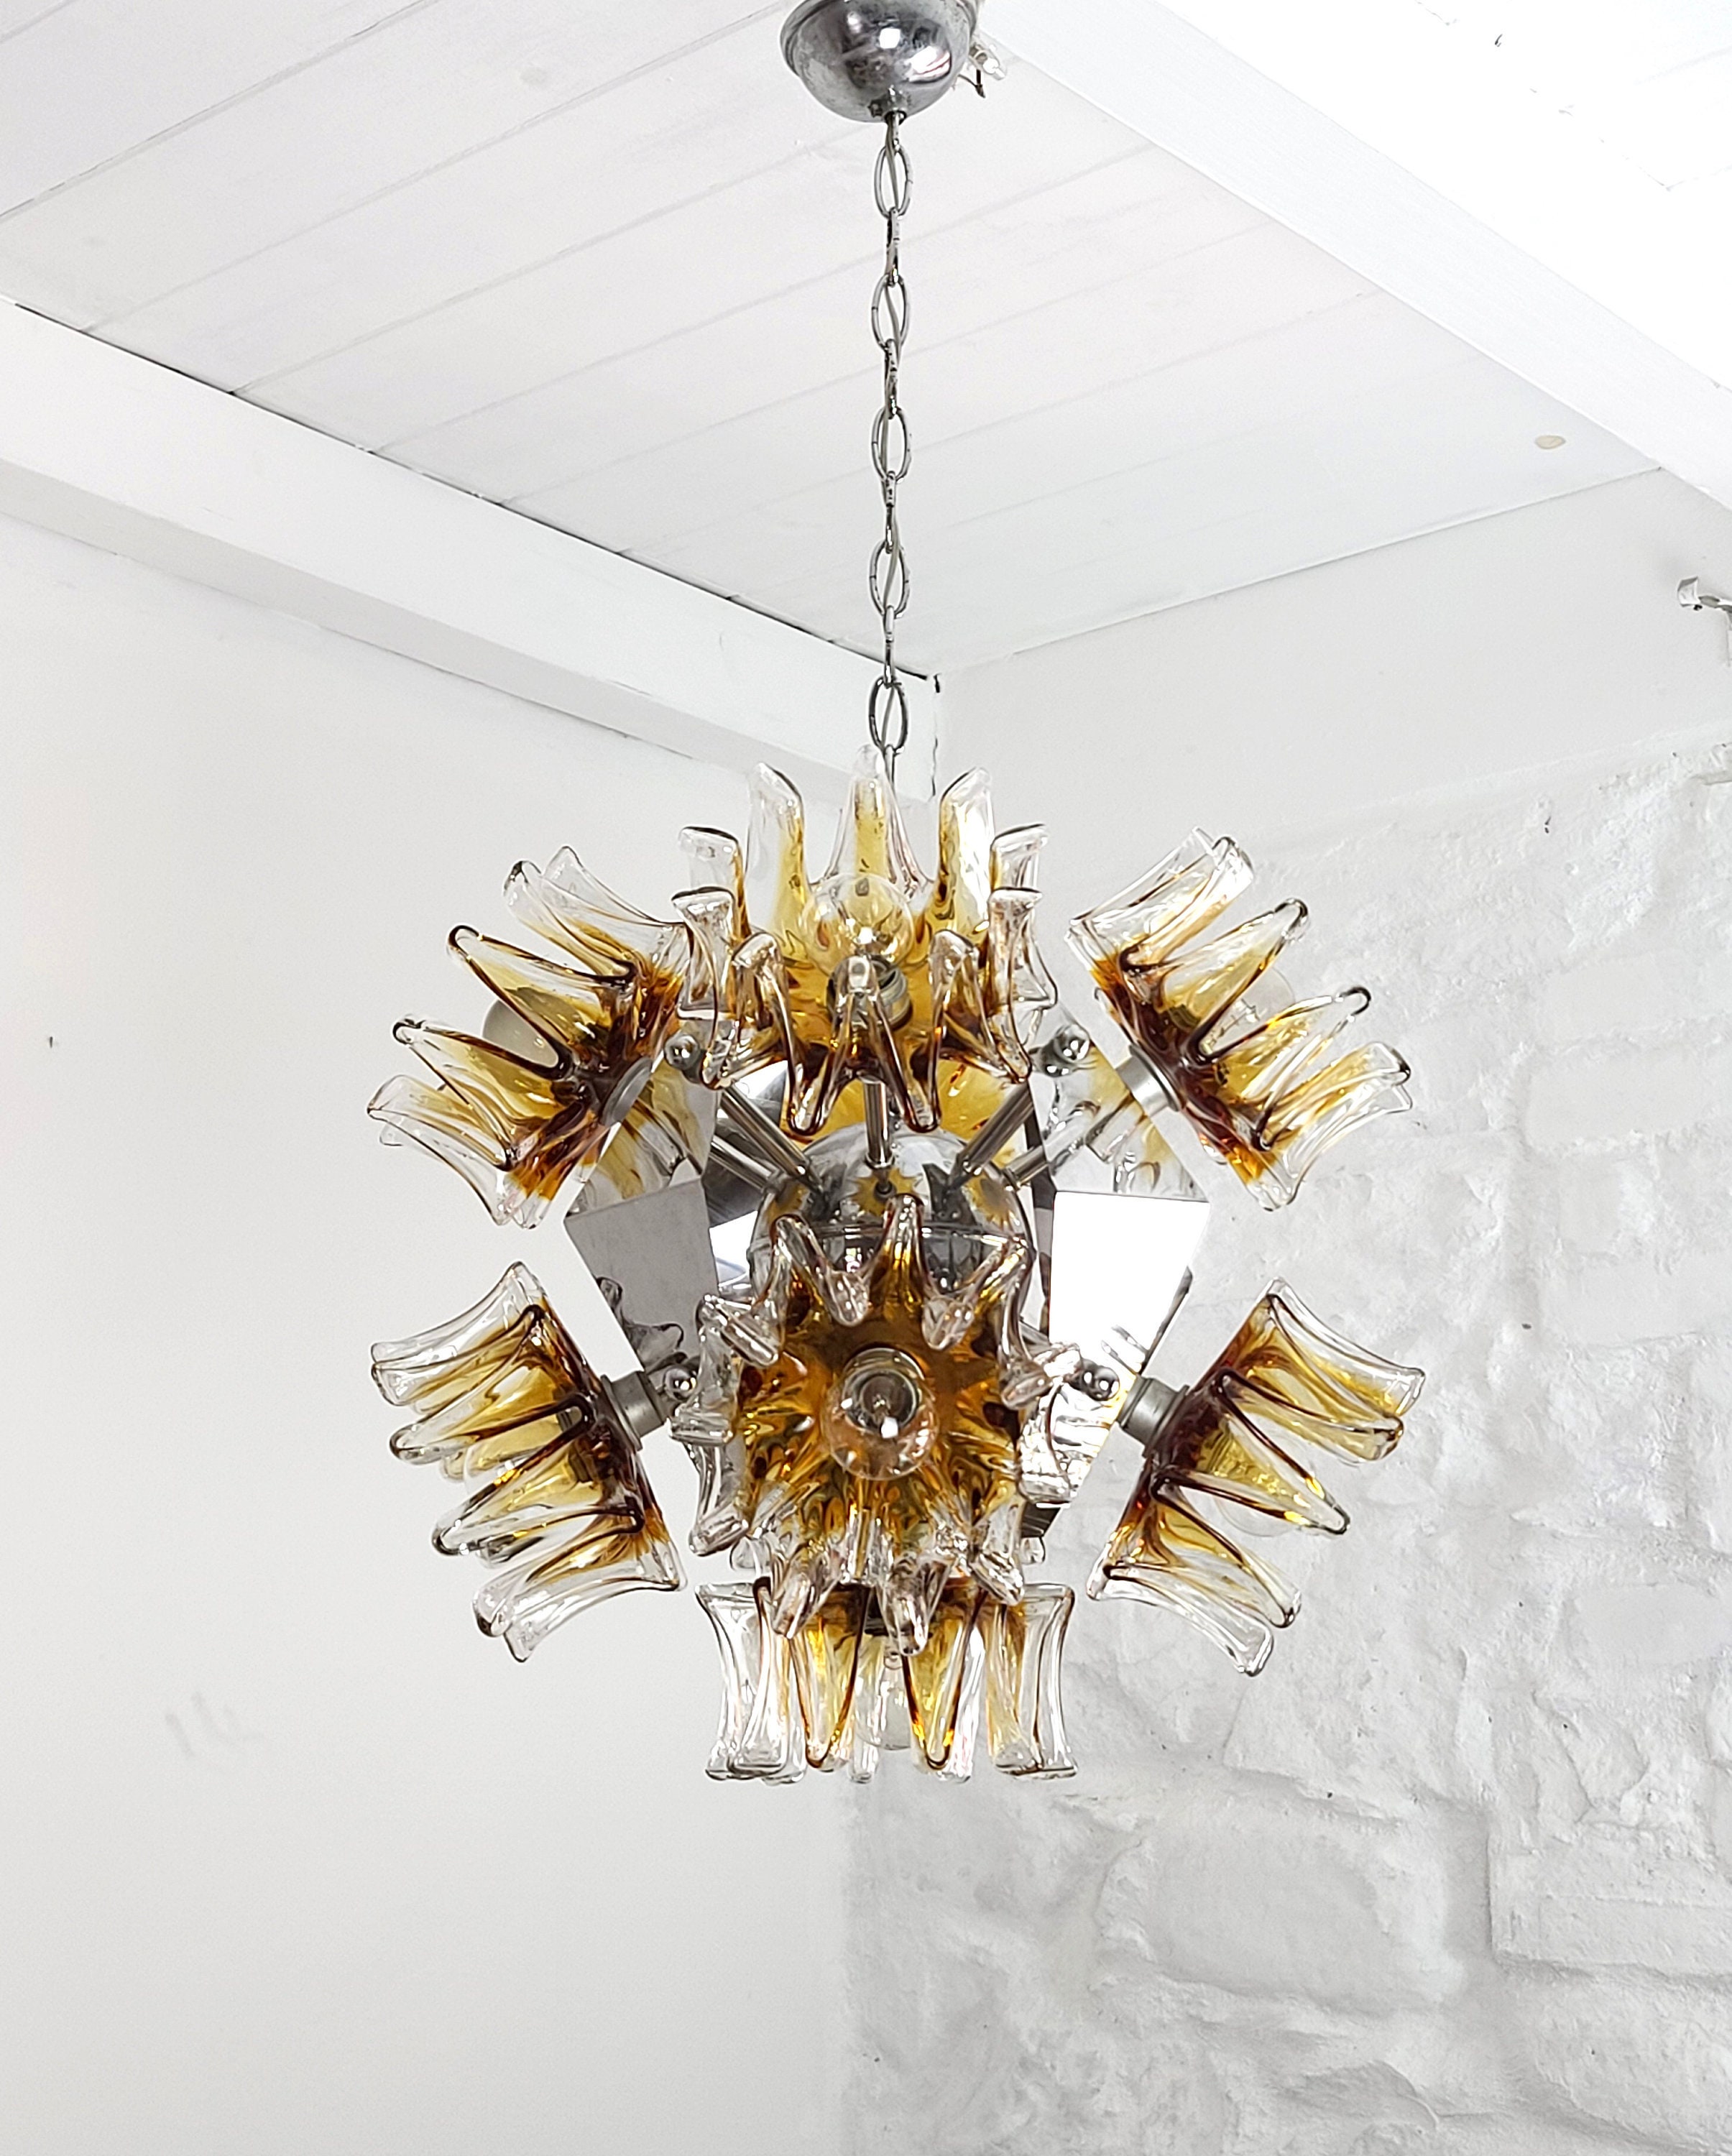 Murano Glass and Chrome Plating 1960's Mid-Century Chandelier by Carlo Nason for Mazzega